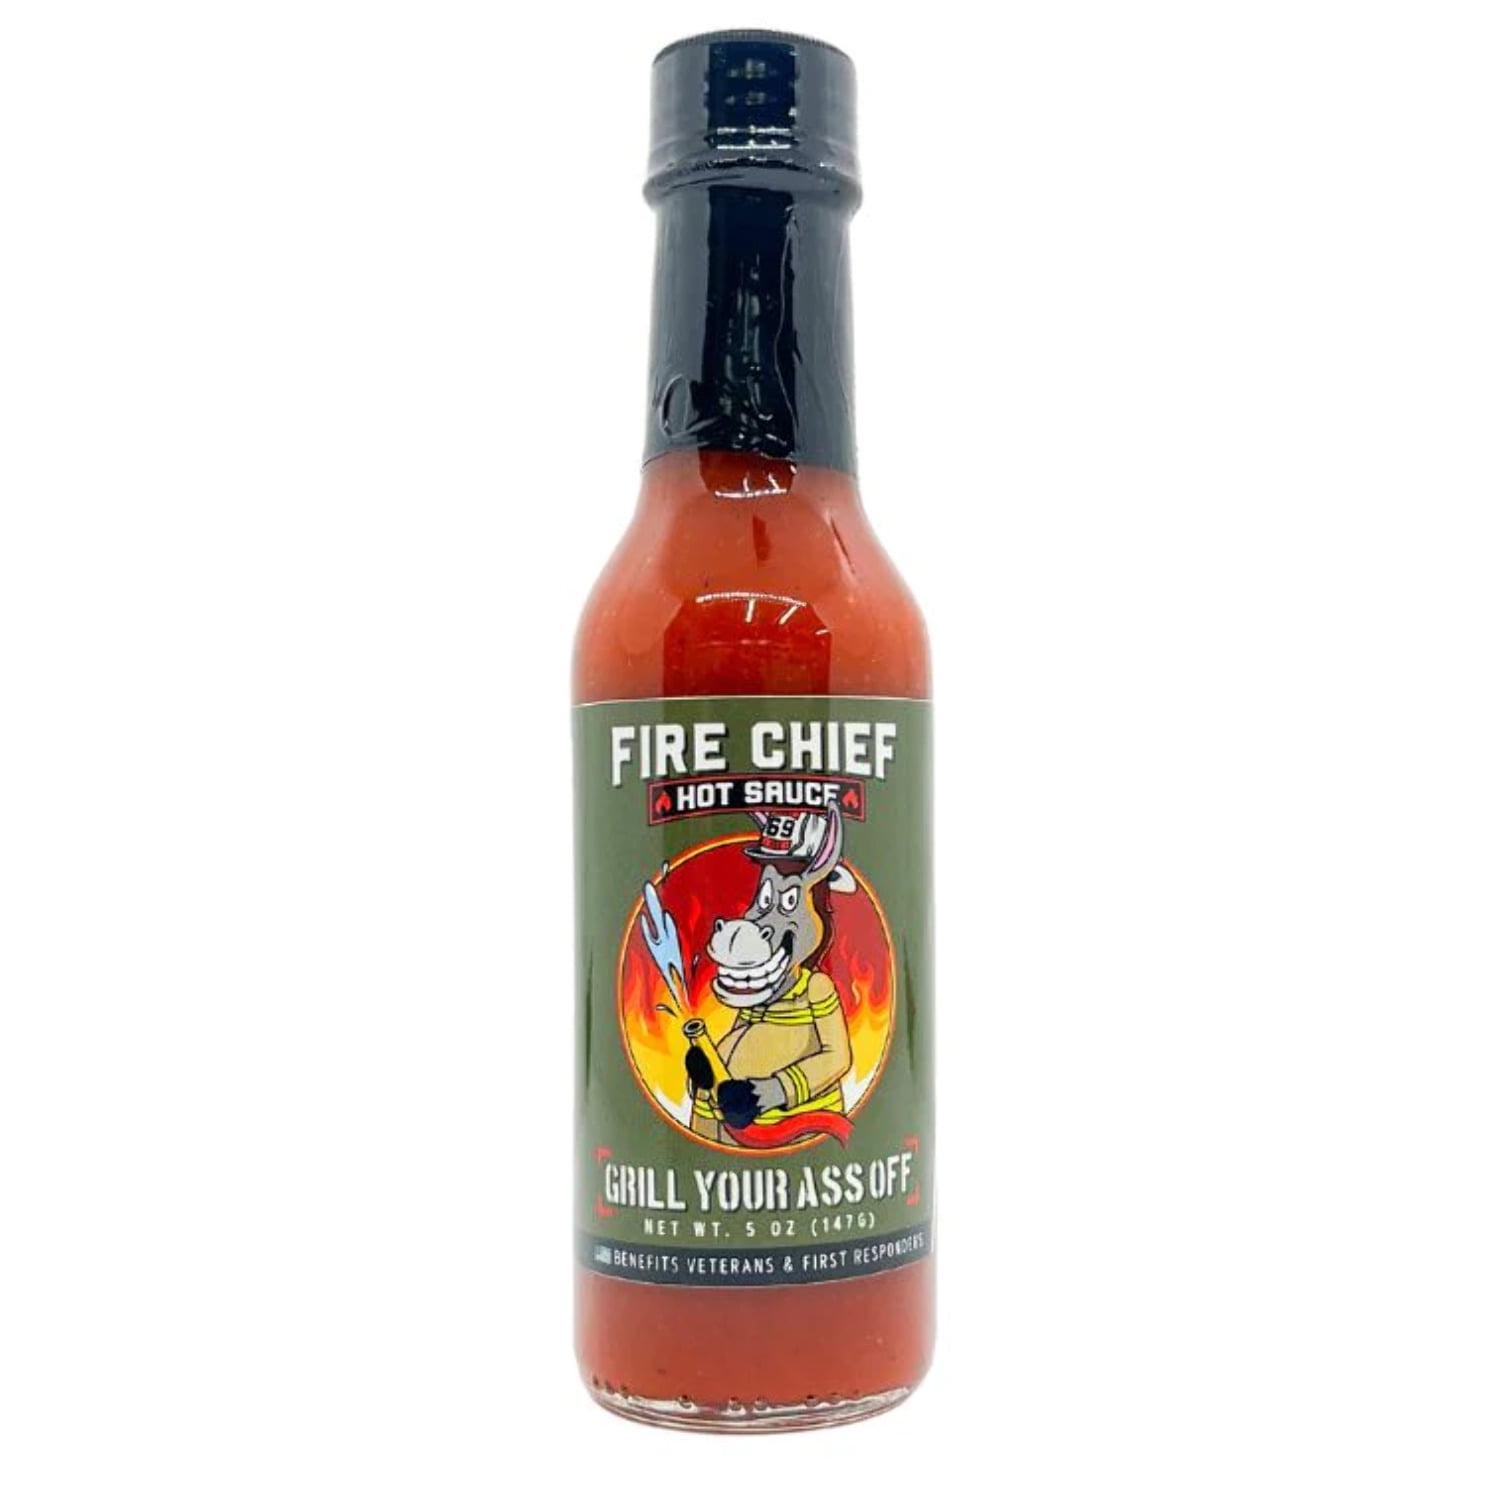 Hot Ones The Classic Garlic Fresno Edition Hot Sauce Made With Natural  Ingredients & Bold Flavors From Fresno Chile Peppers & Extra Garlic, 5 fl  oz